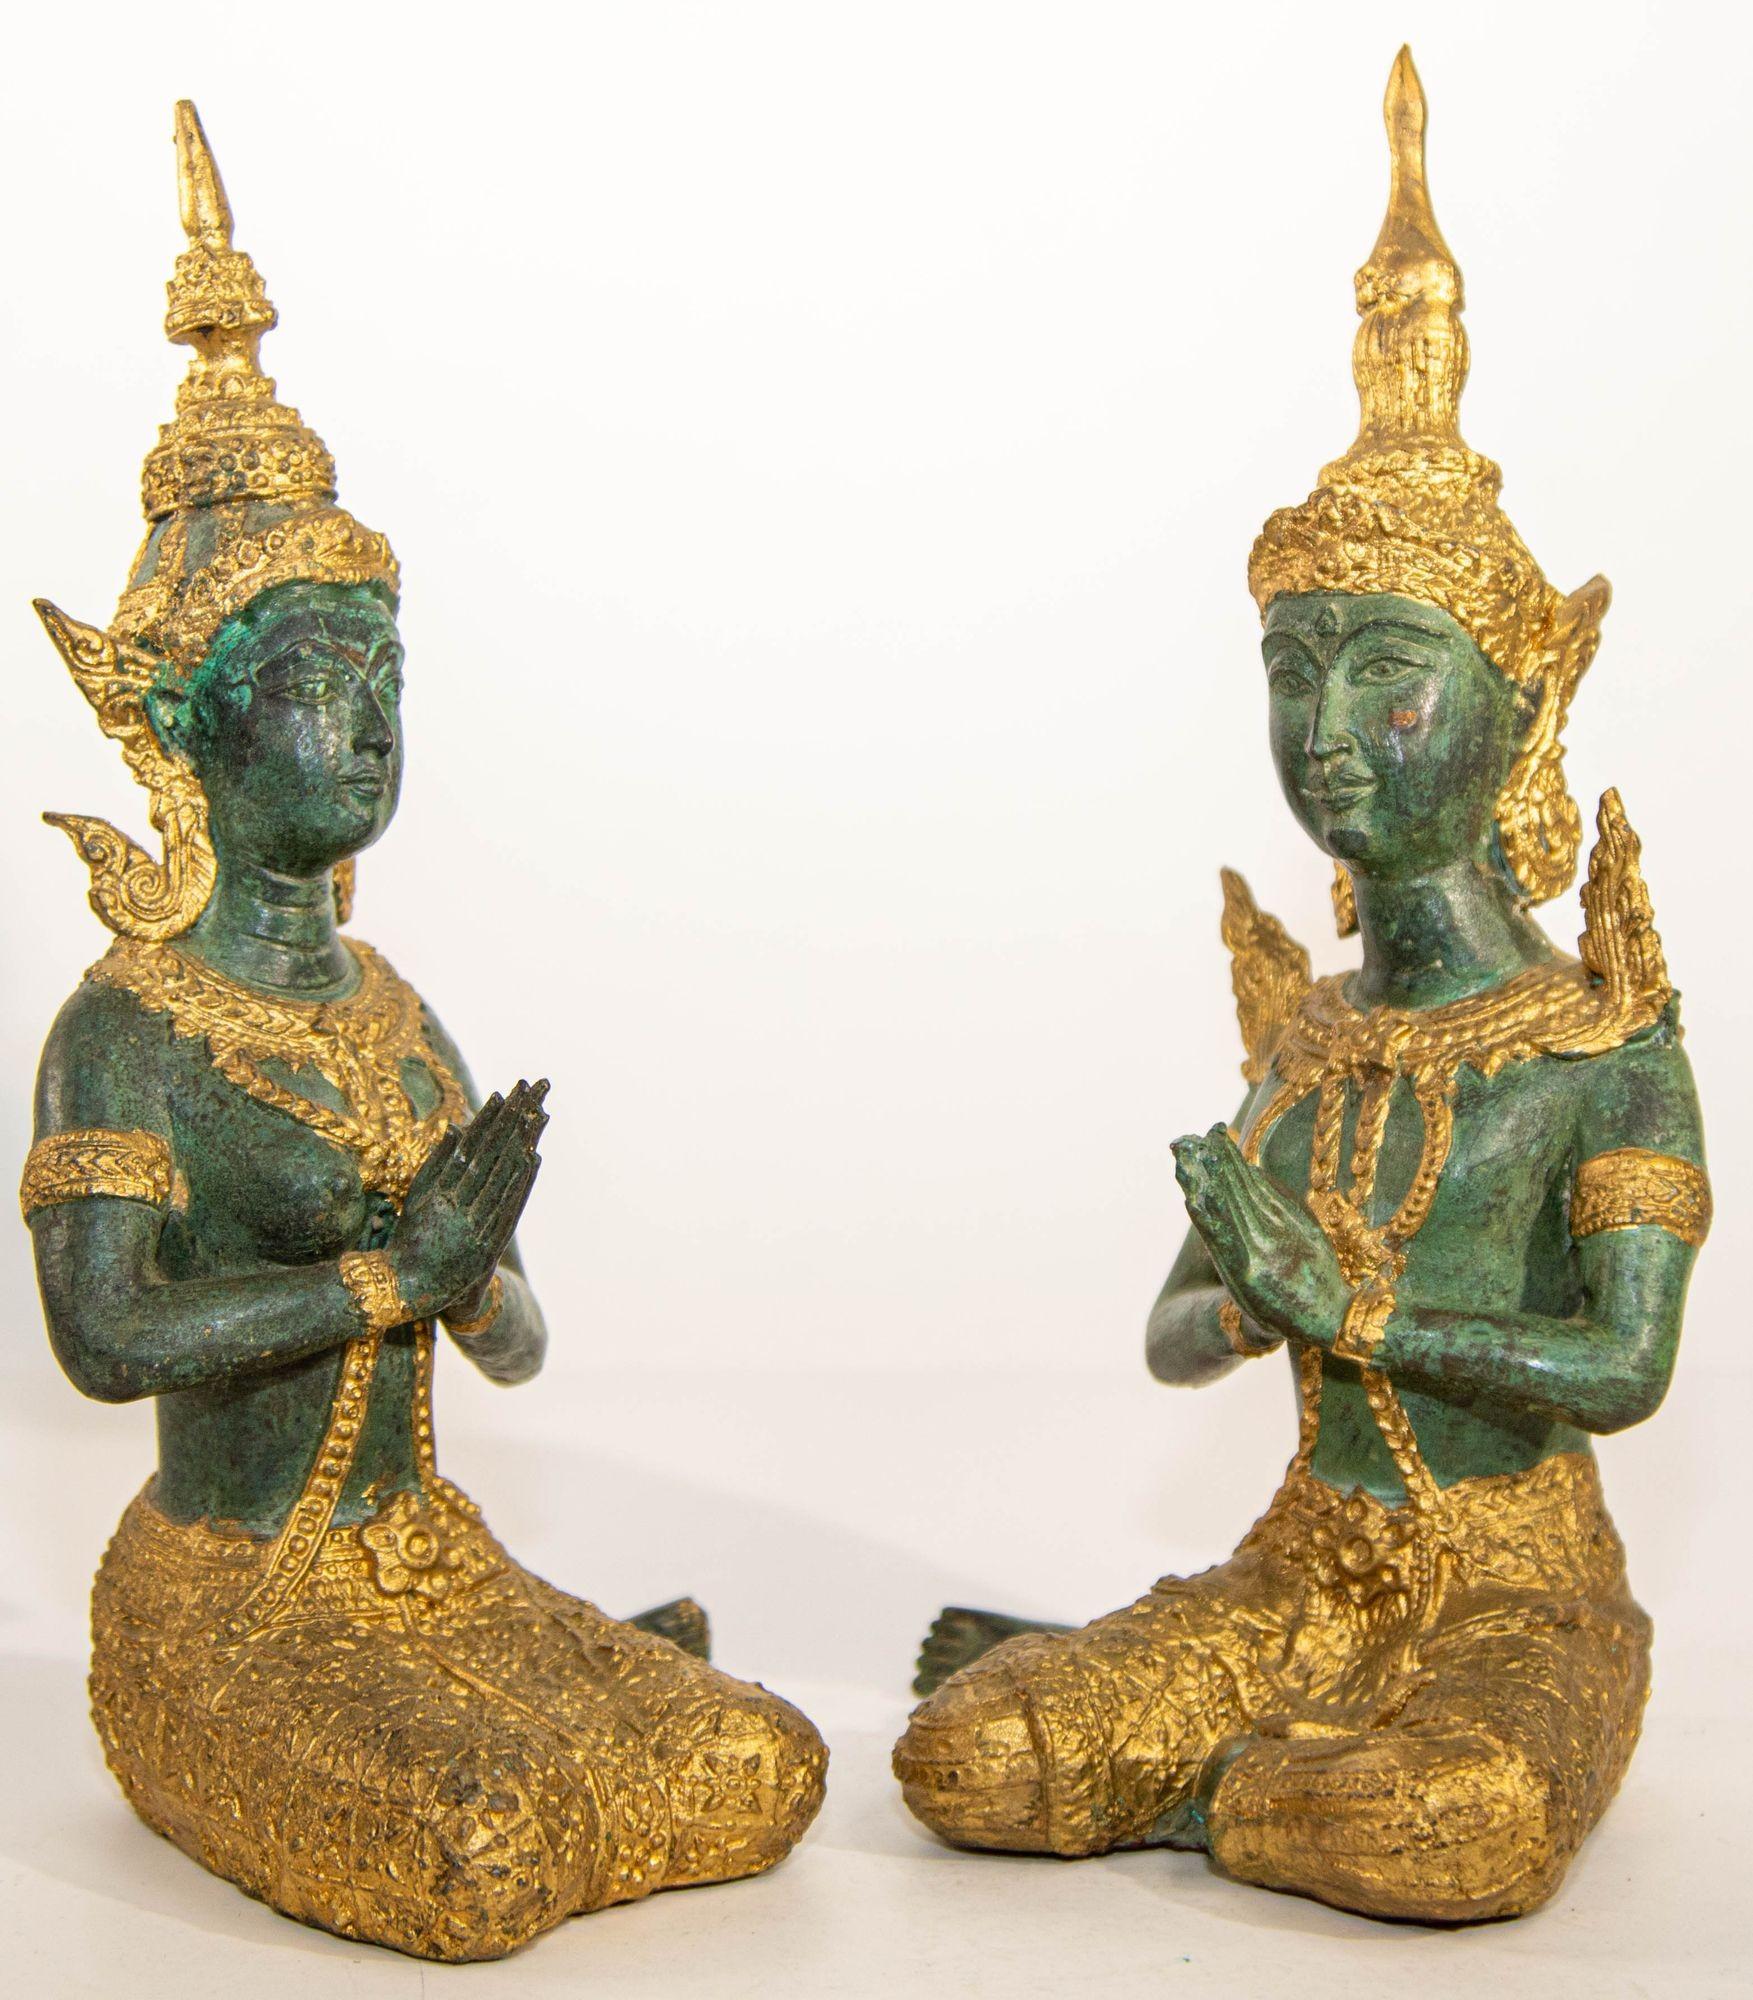 Two Asian gilt bronze Teppanom kneeling Thai sacred angels.
Bronze gilded temple guardians in a sitting position. These temple guardians were made in Thailand.
Gilt Kneeling Thai Buddhist gatekeeper male and female angels kneeling